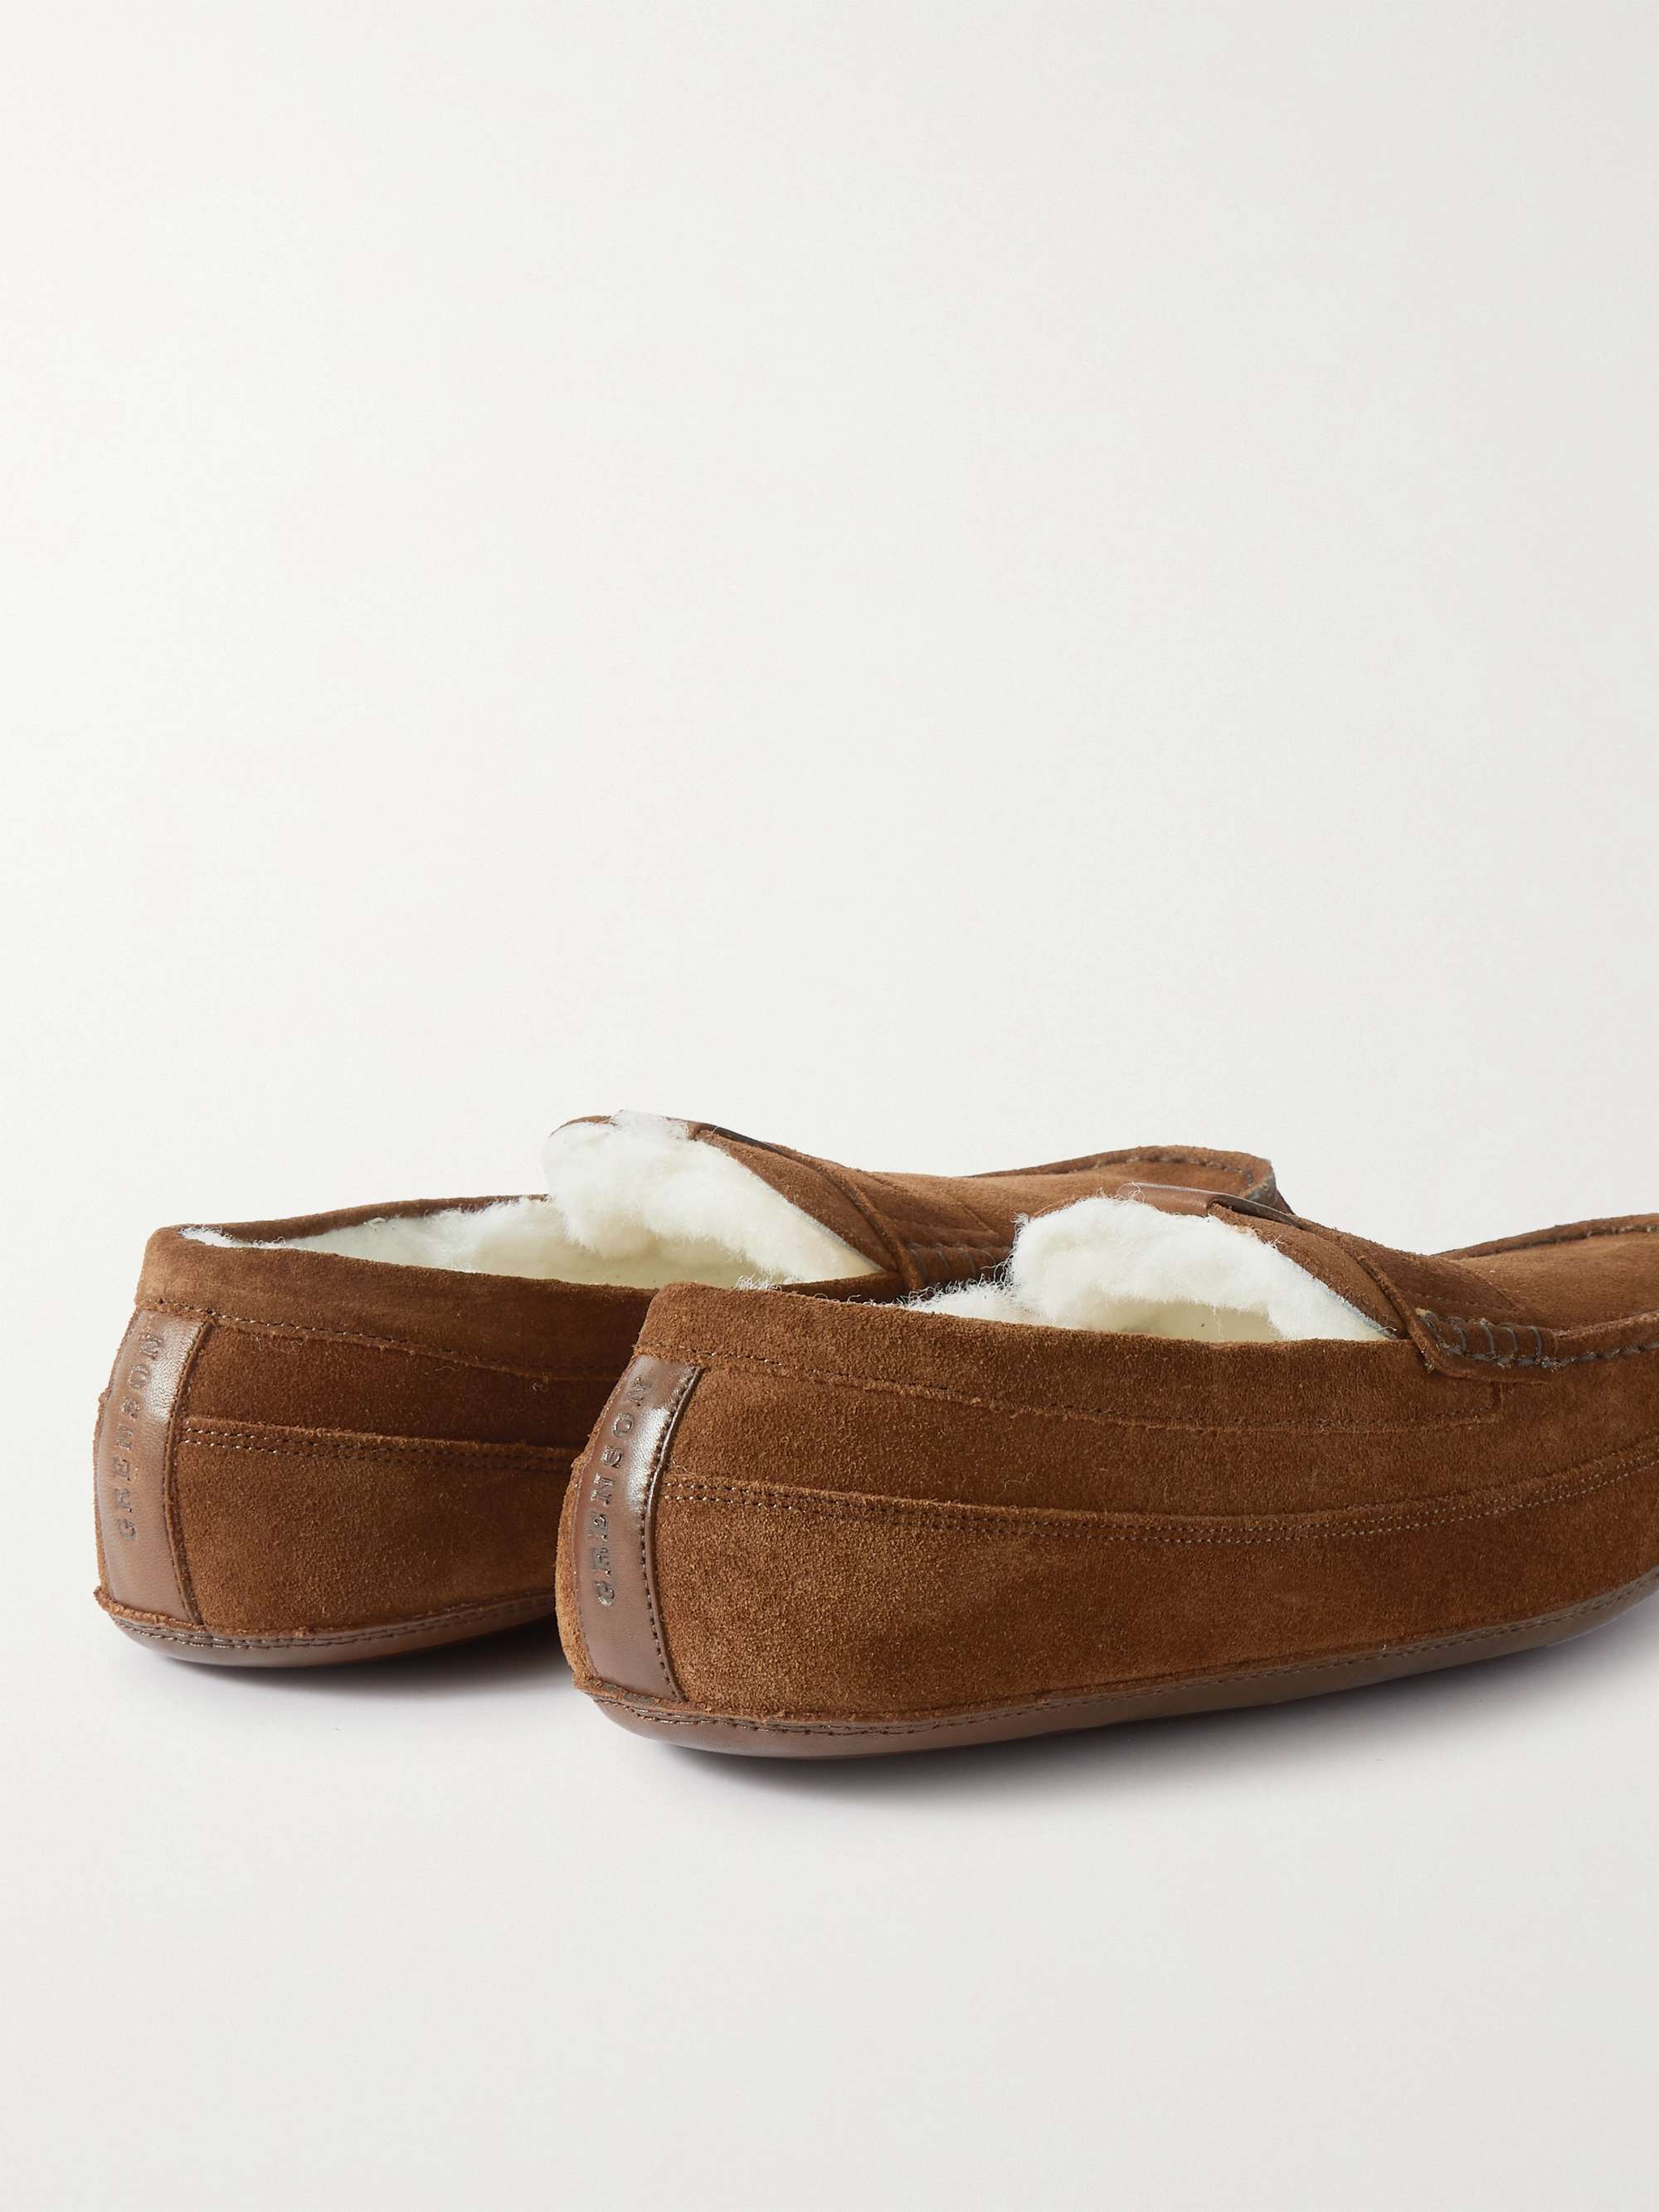 GRENSON Sly Shearling-Lined Suede Slippers